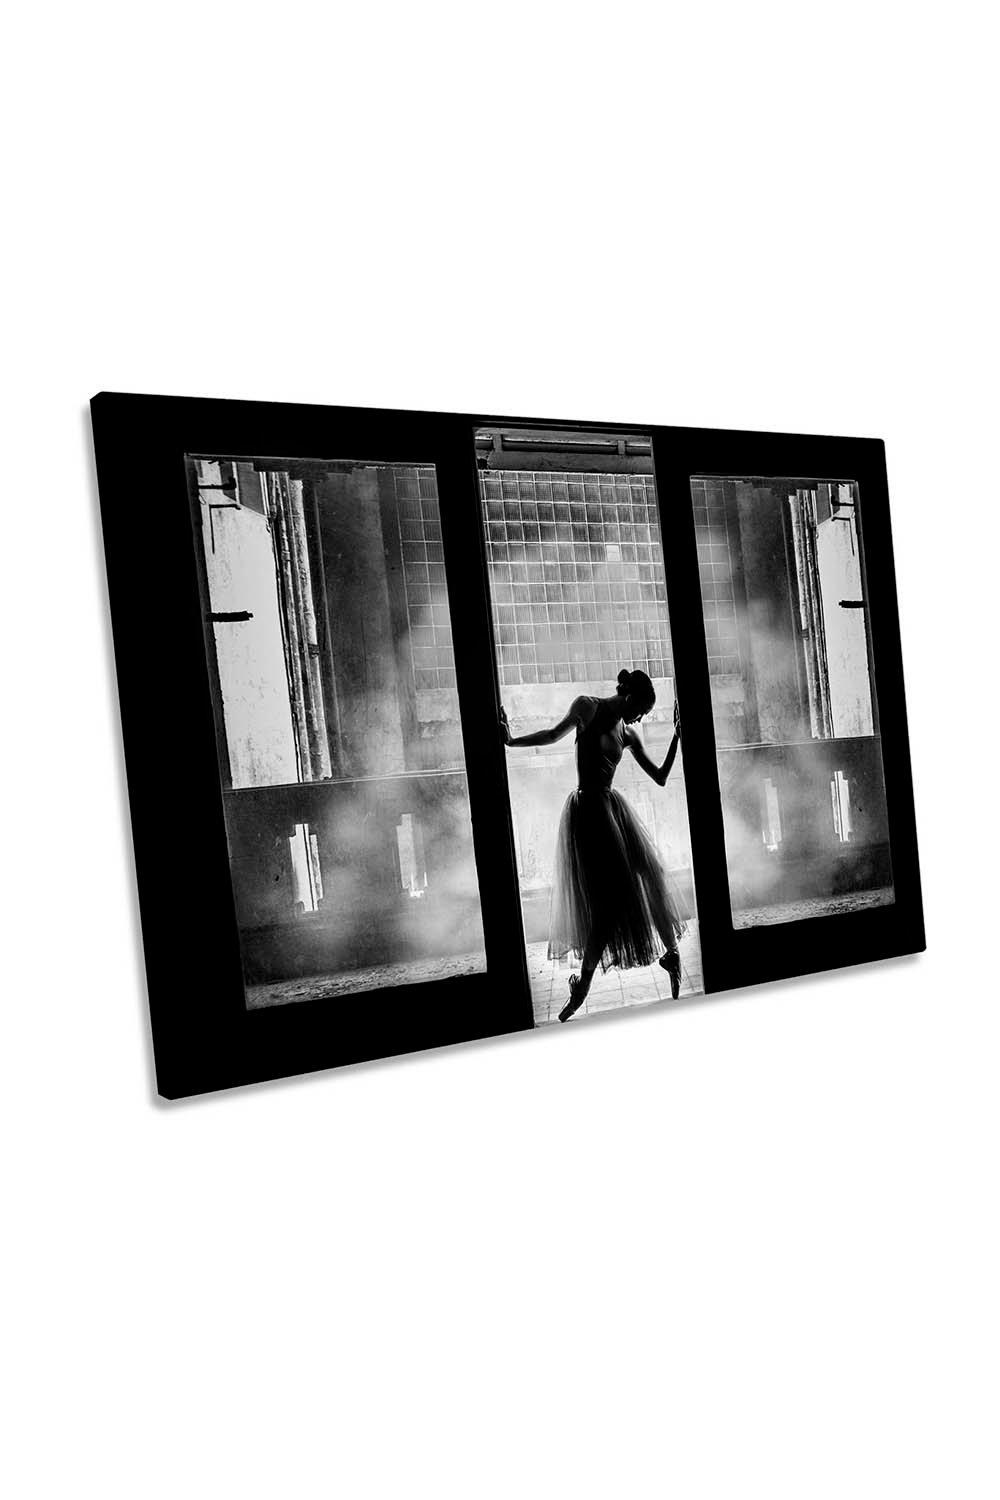 Are You Ready Performance Dancer Canvas Wall Art Picture Print